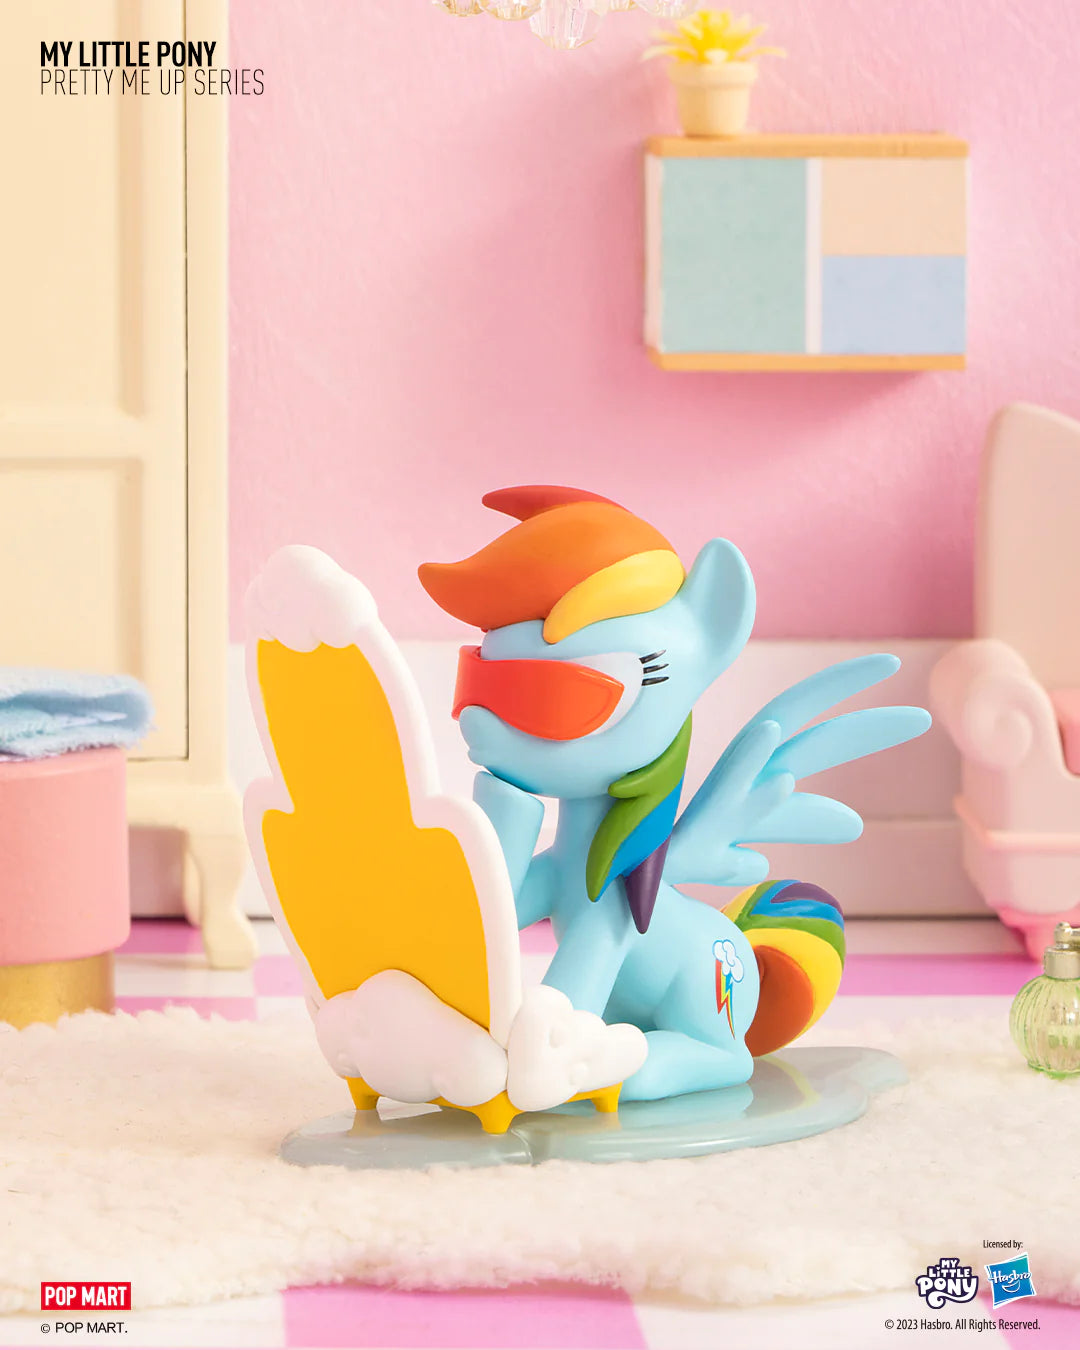 My Little Pony Pretty Me Up Blind Box Series